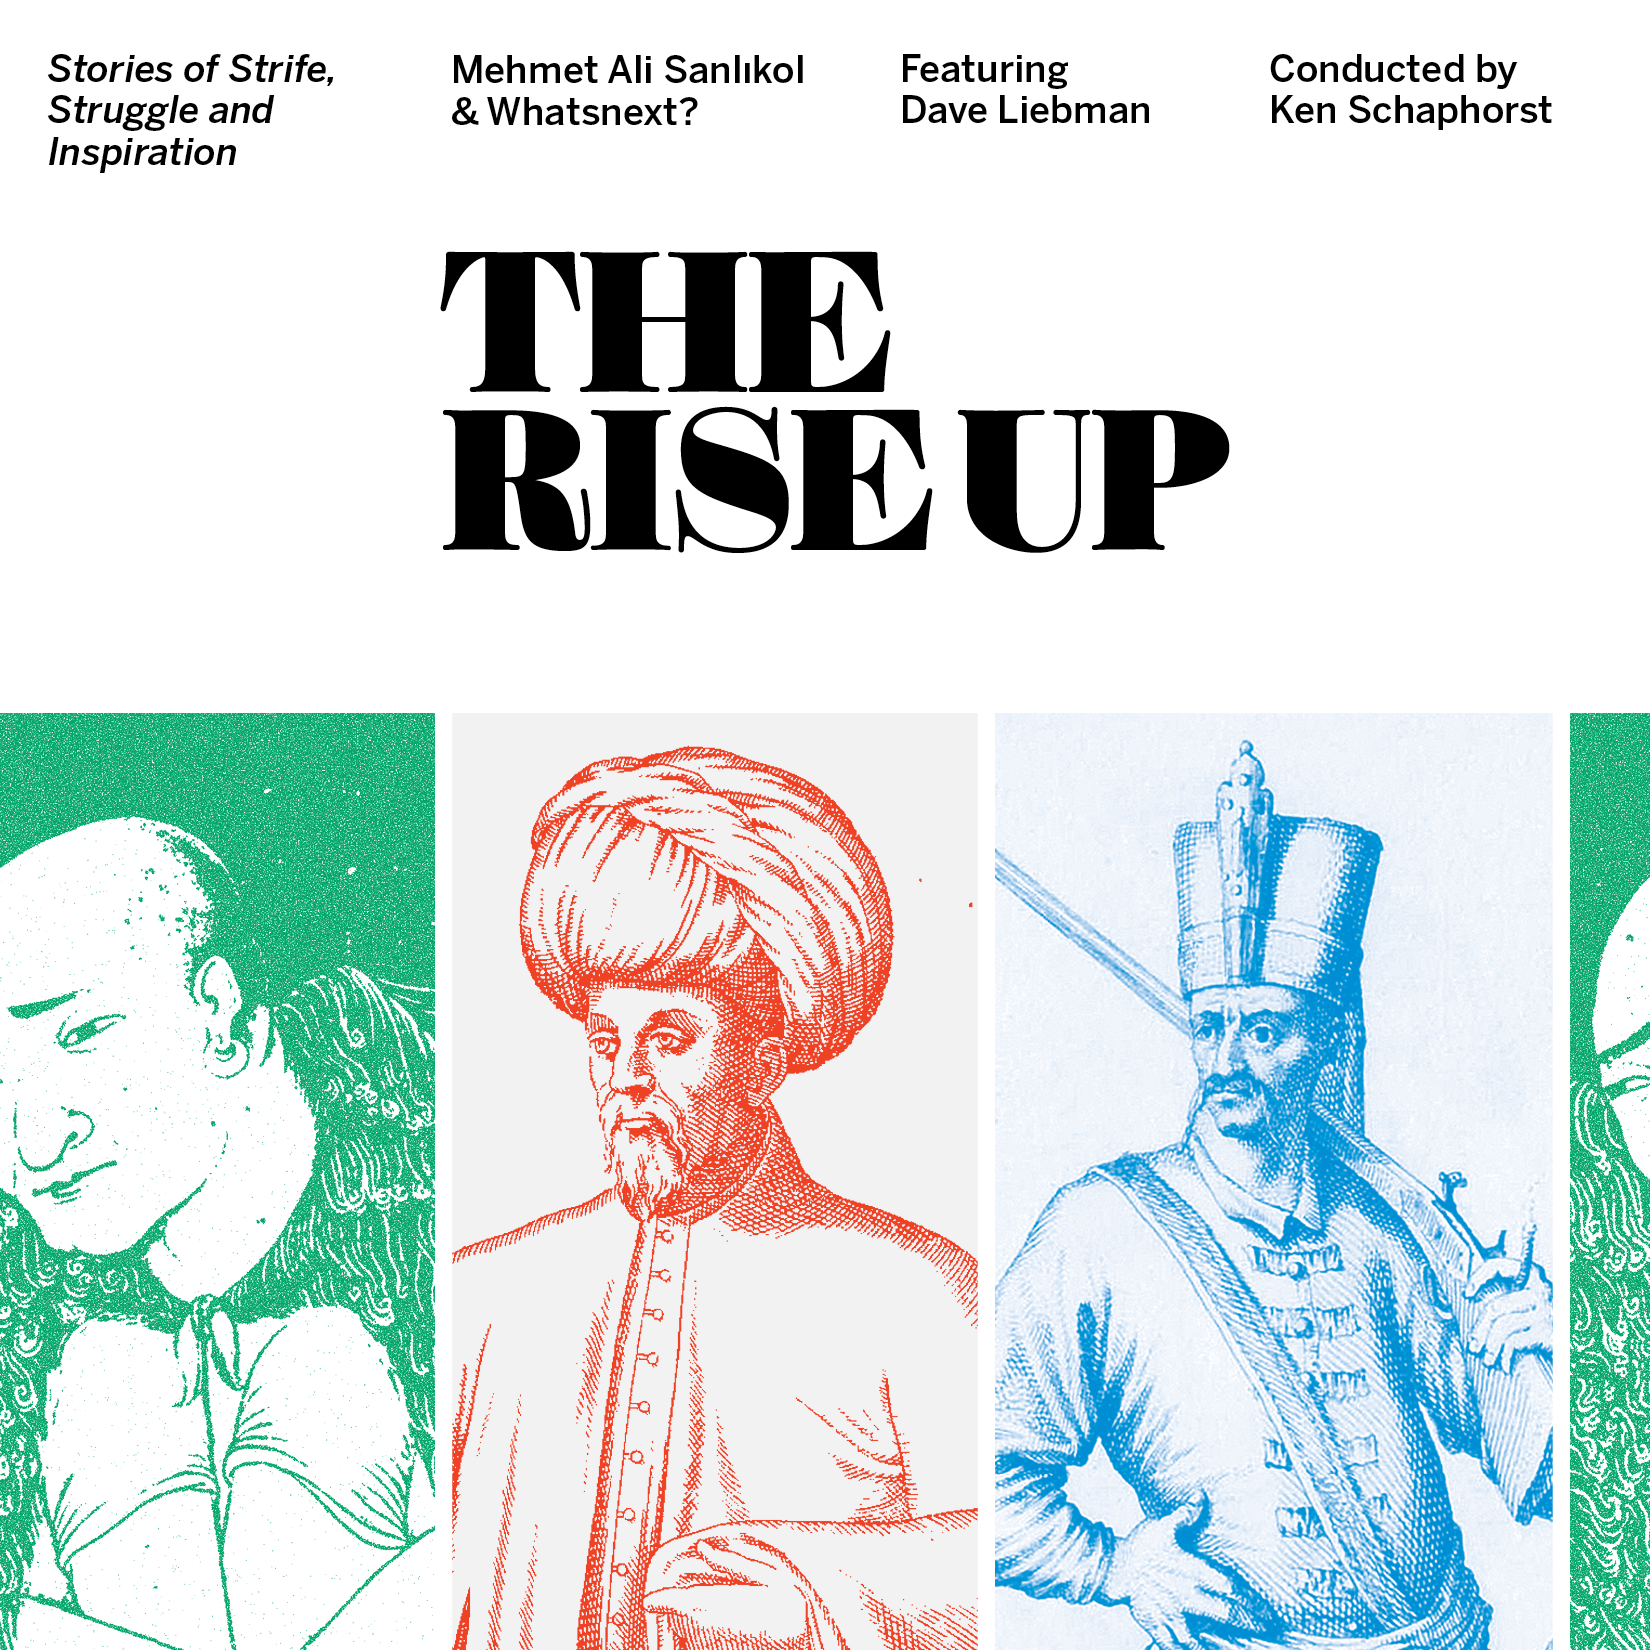 Mehmet Ali Sanlıkol and Whatsnext The Rise Up: Stories of Strife, Struggle and Inspiration